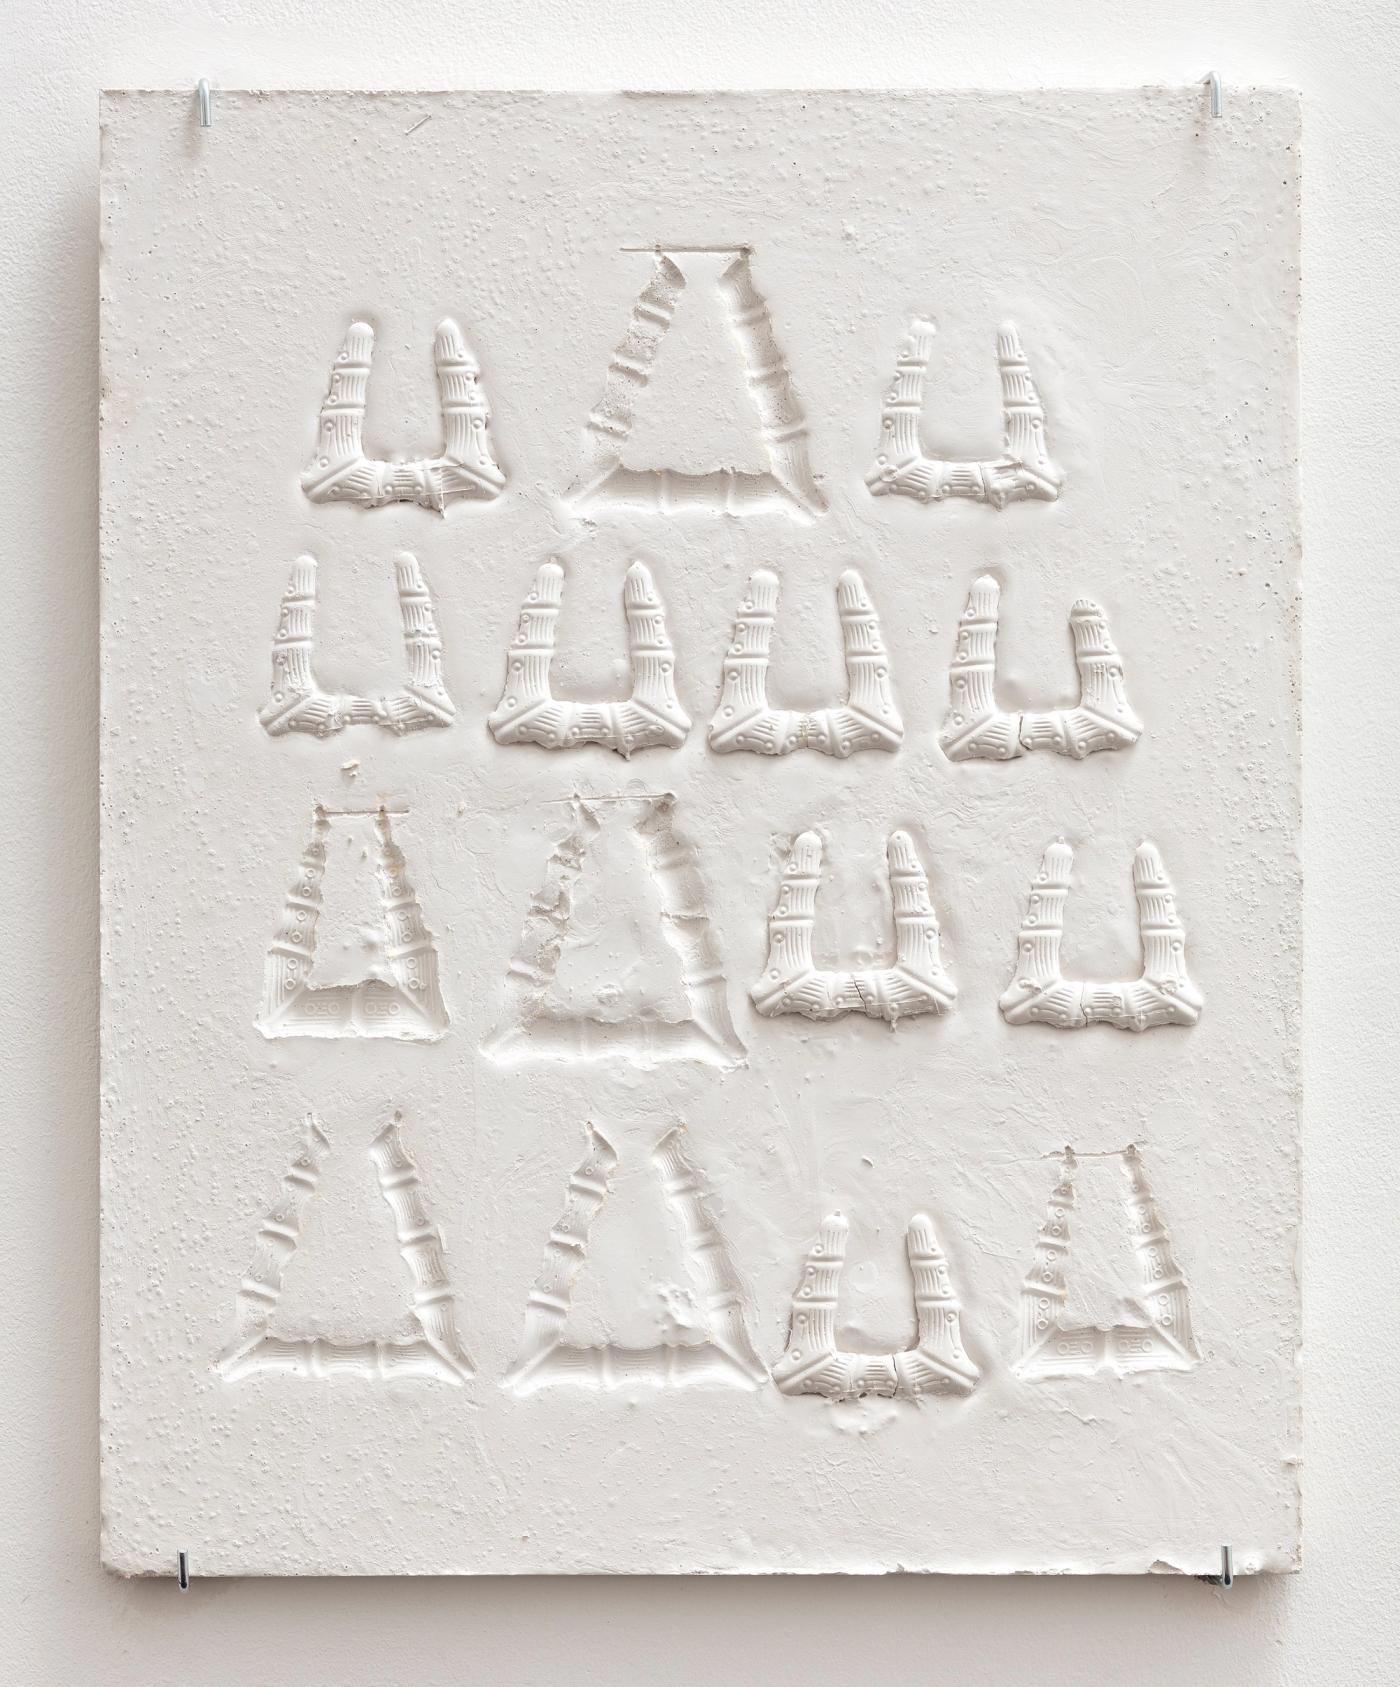 Image of Triangle Bamboo Earrings Relief and Sunken Relief Arrangement, 2018: Plaster